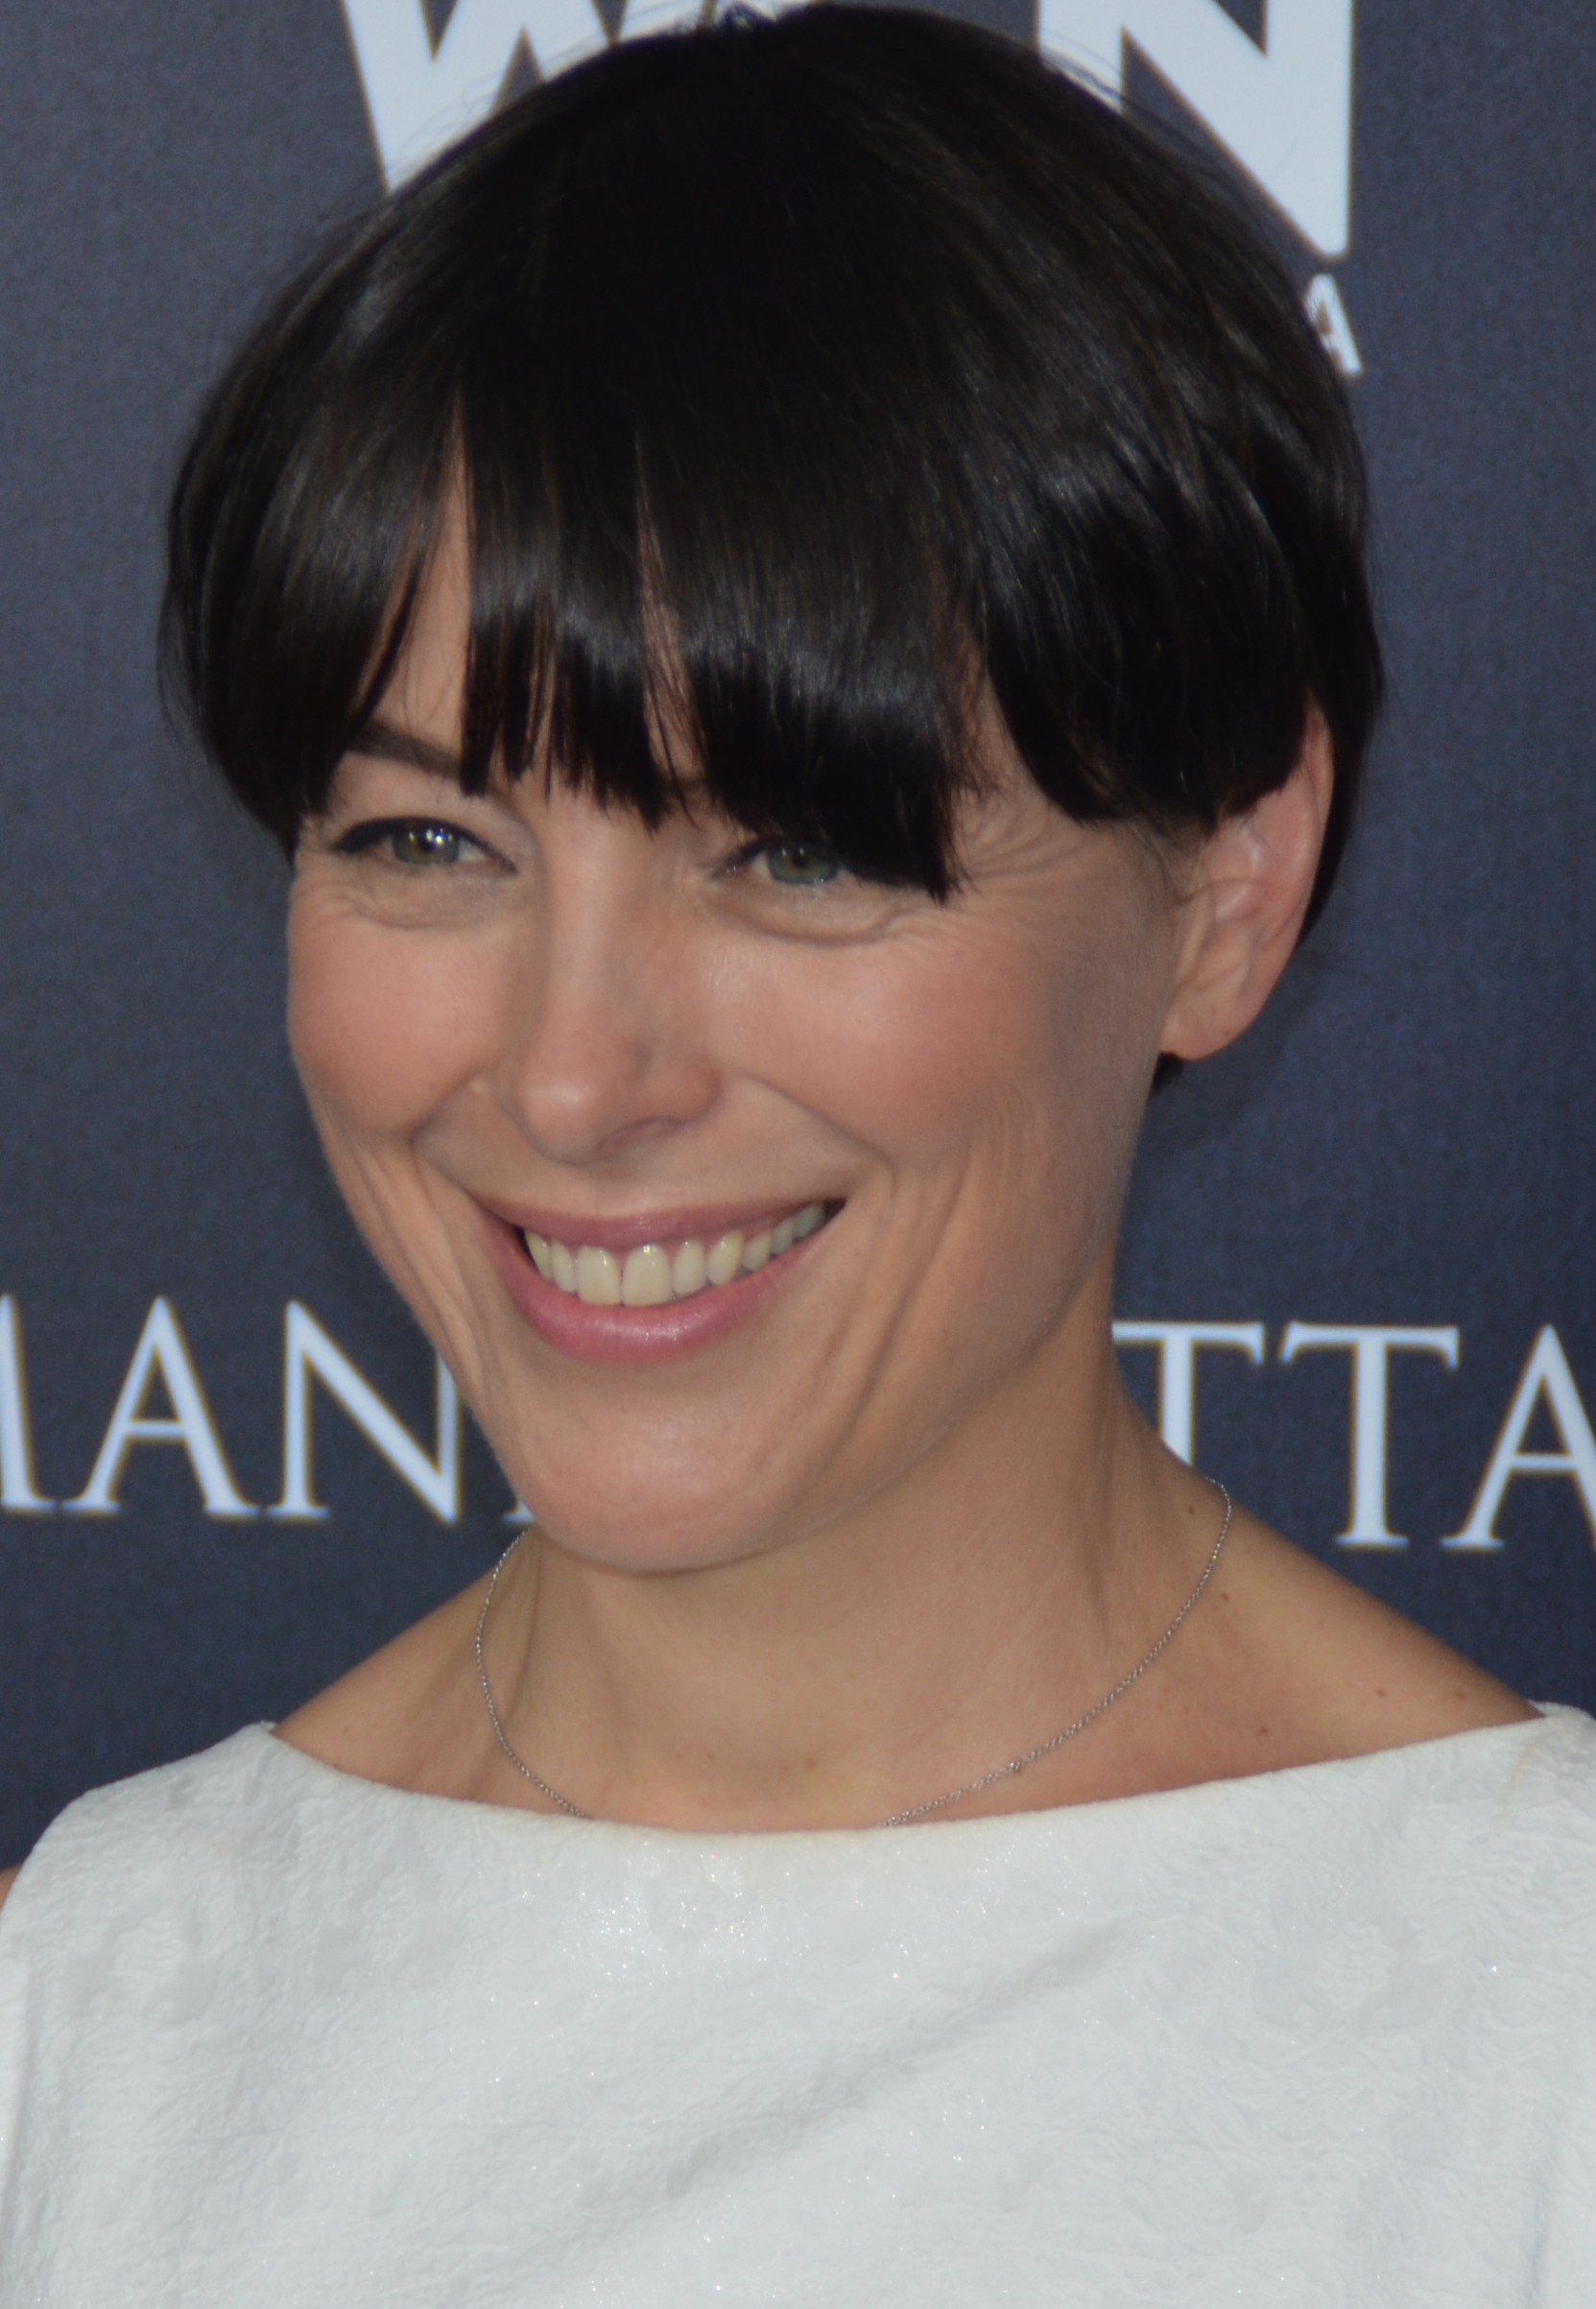 Actress Olivia Williams at the TCA/CTAM press tour event and the special panel event at the Paley Center on July 9, 2014 | Getty Images